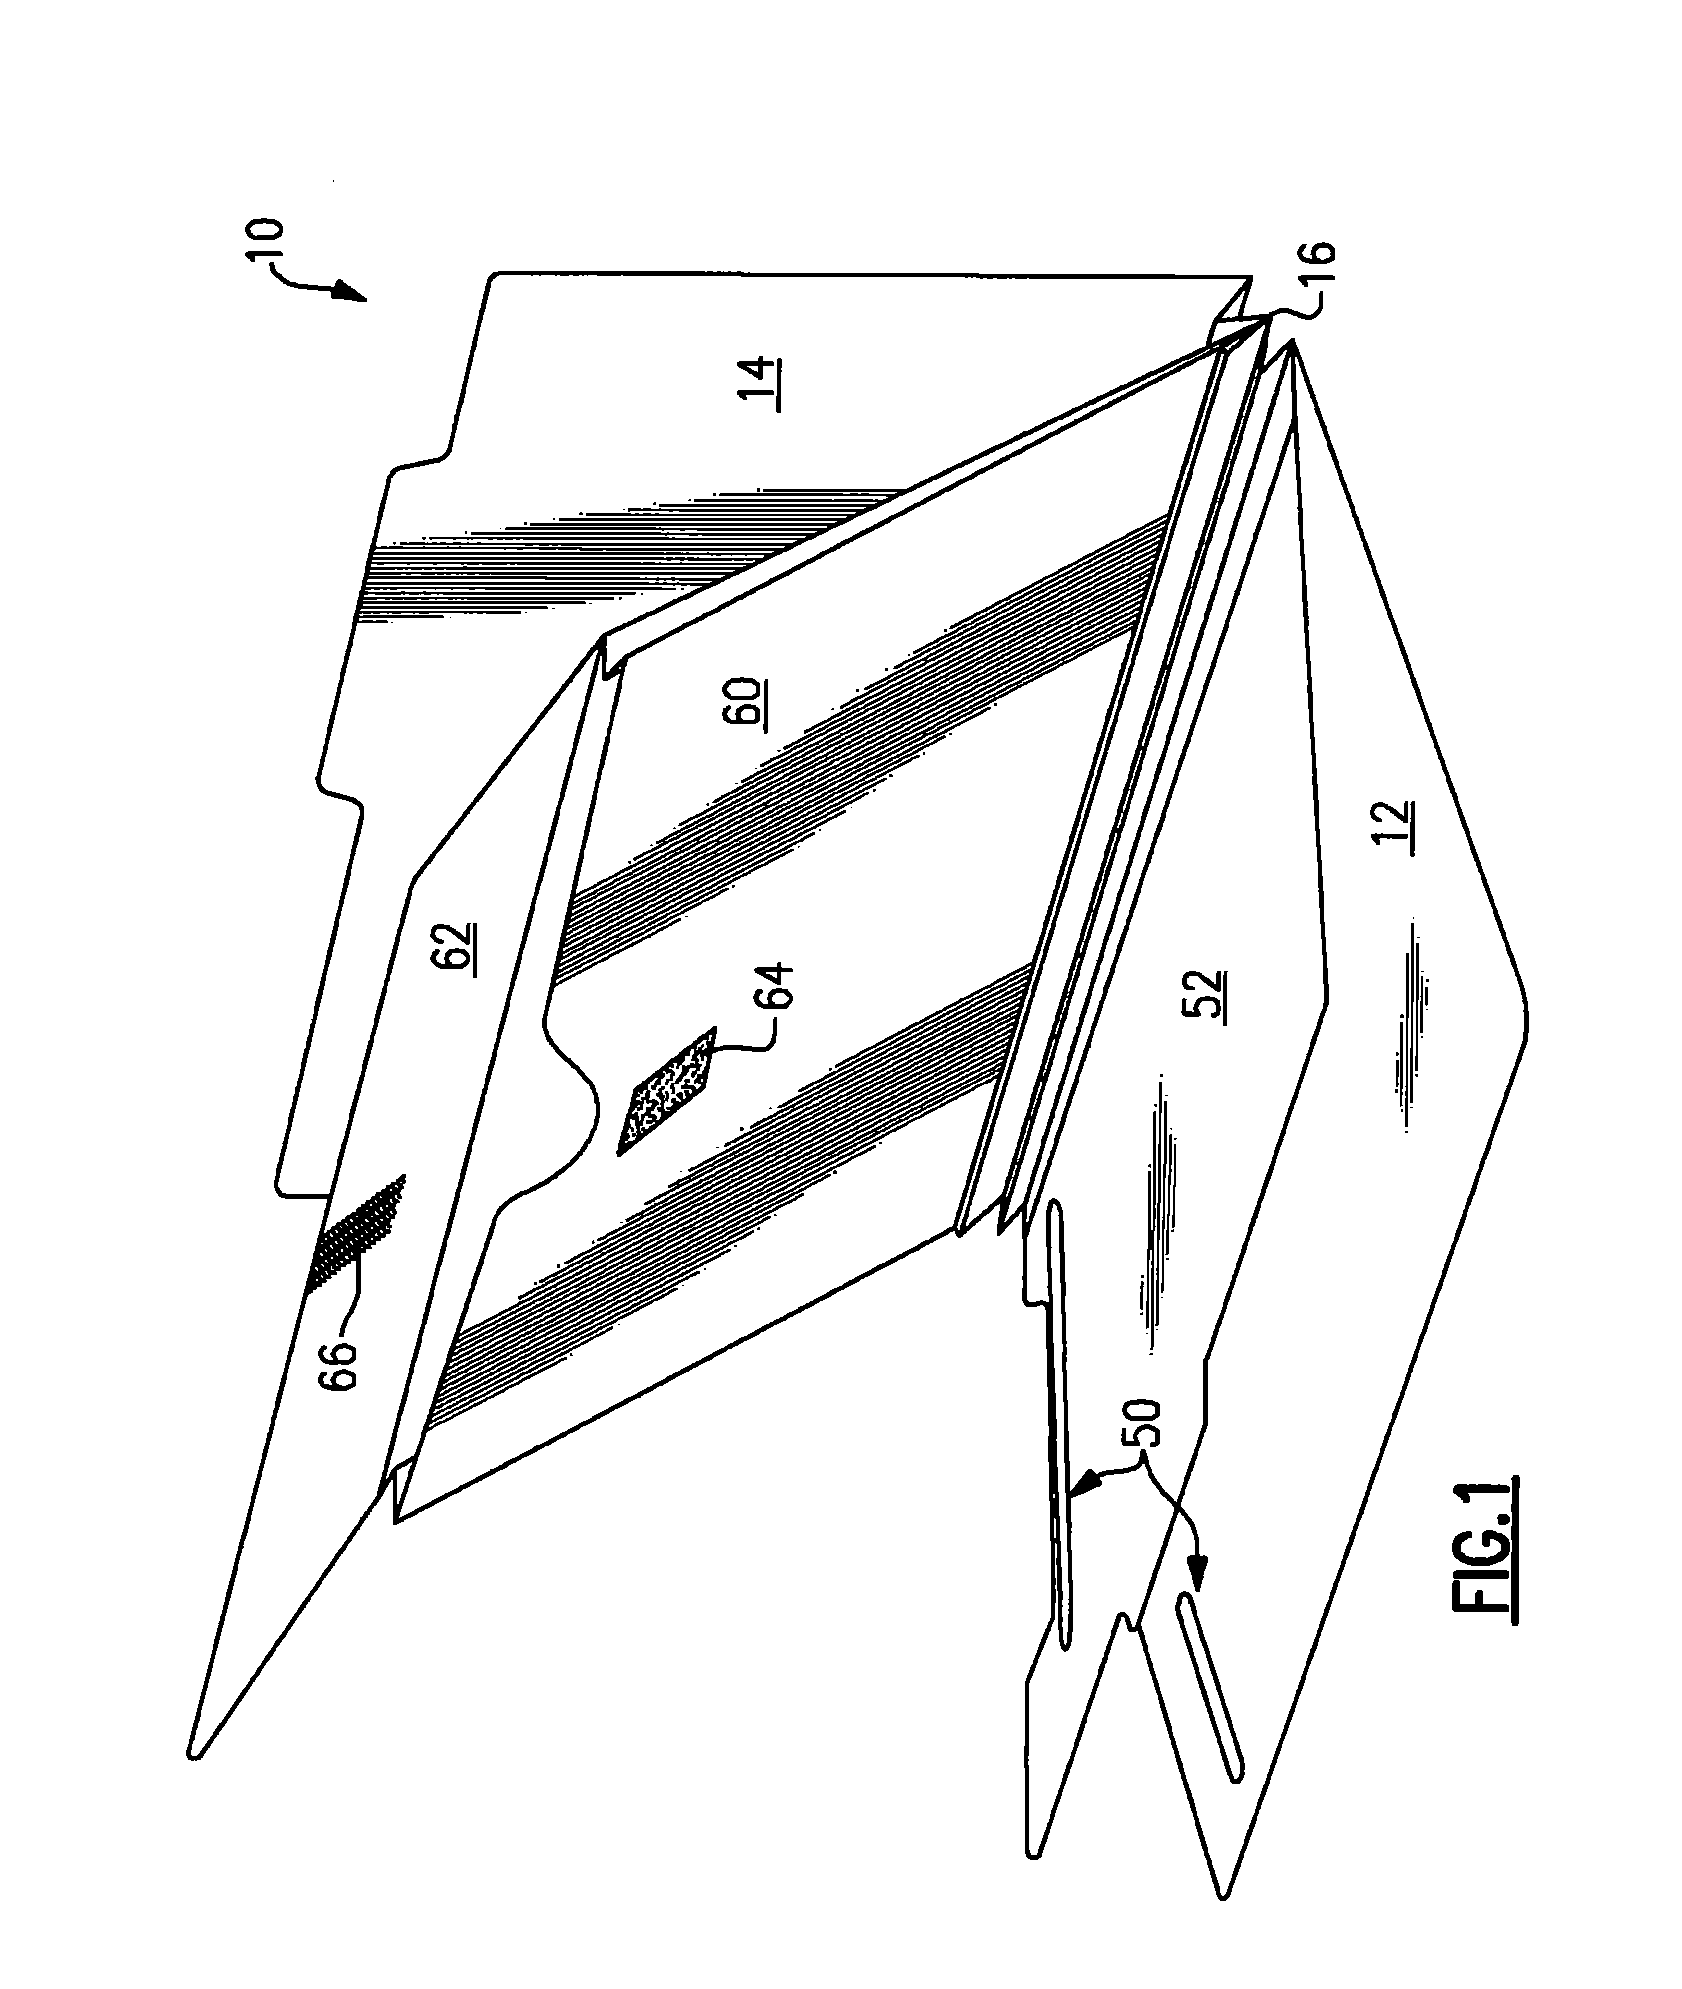 Strengthened Folder With Inserted Elements and System for Element Interchangeability